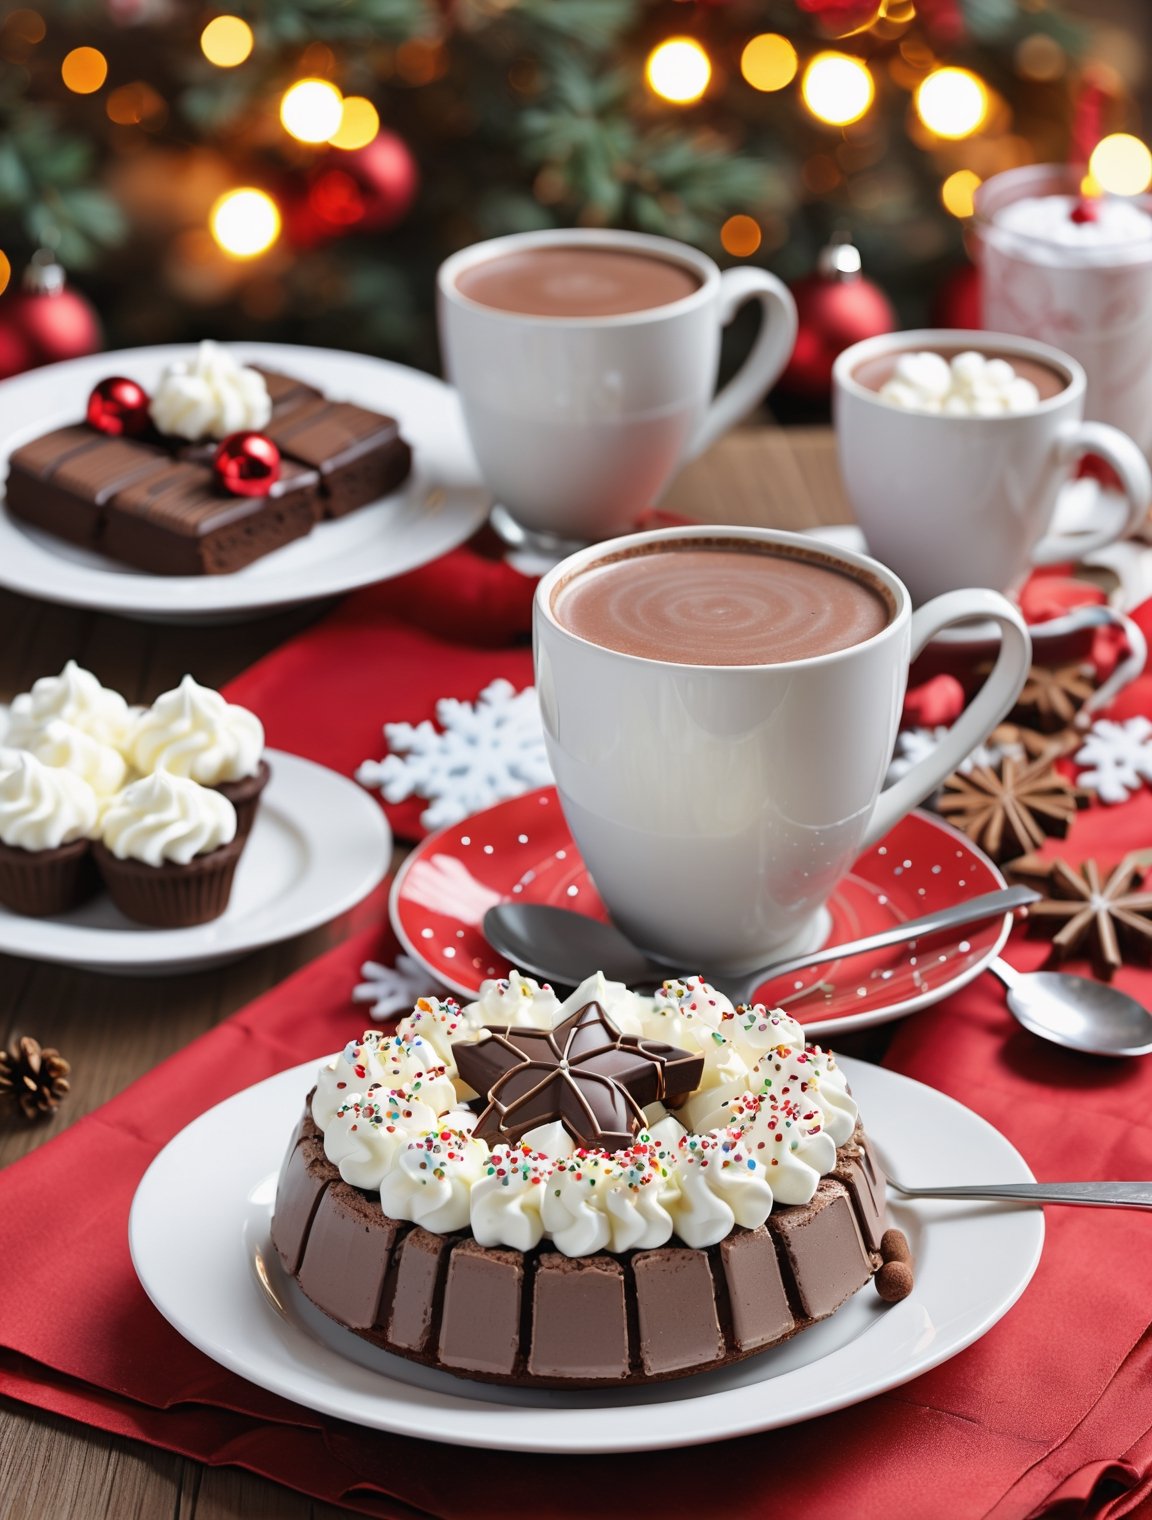 ((anime)), delicious dessert and a cup of hot chocolate, Christmas setting, dynamic angle, depth of field, detail XL,